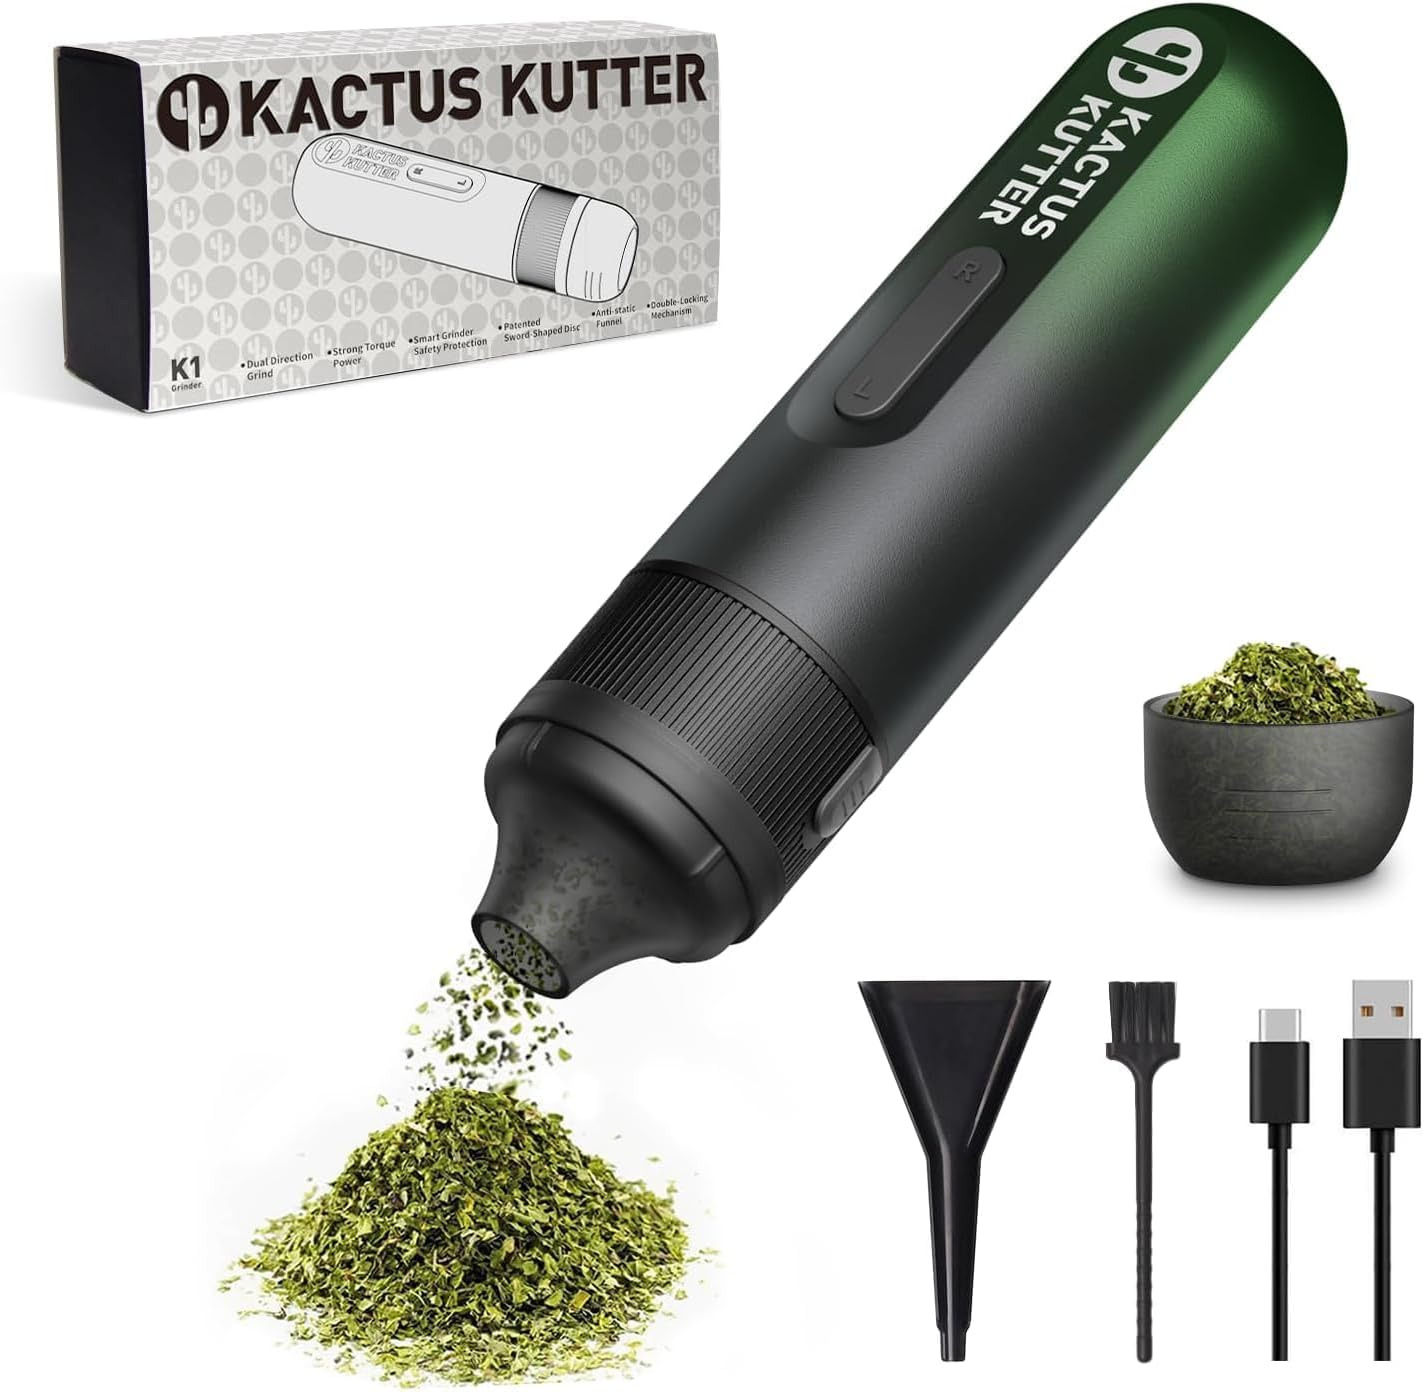 K1 Electric Herb Grinder Battery Powered Automatic Portable Herb Grinder - Holds